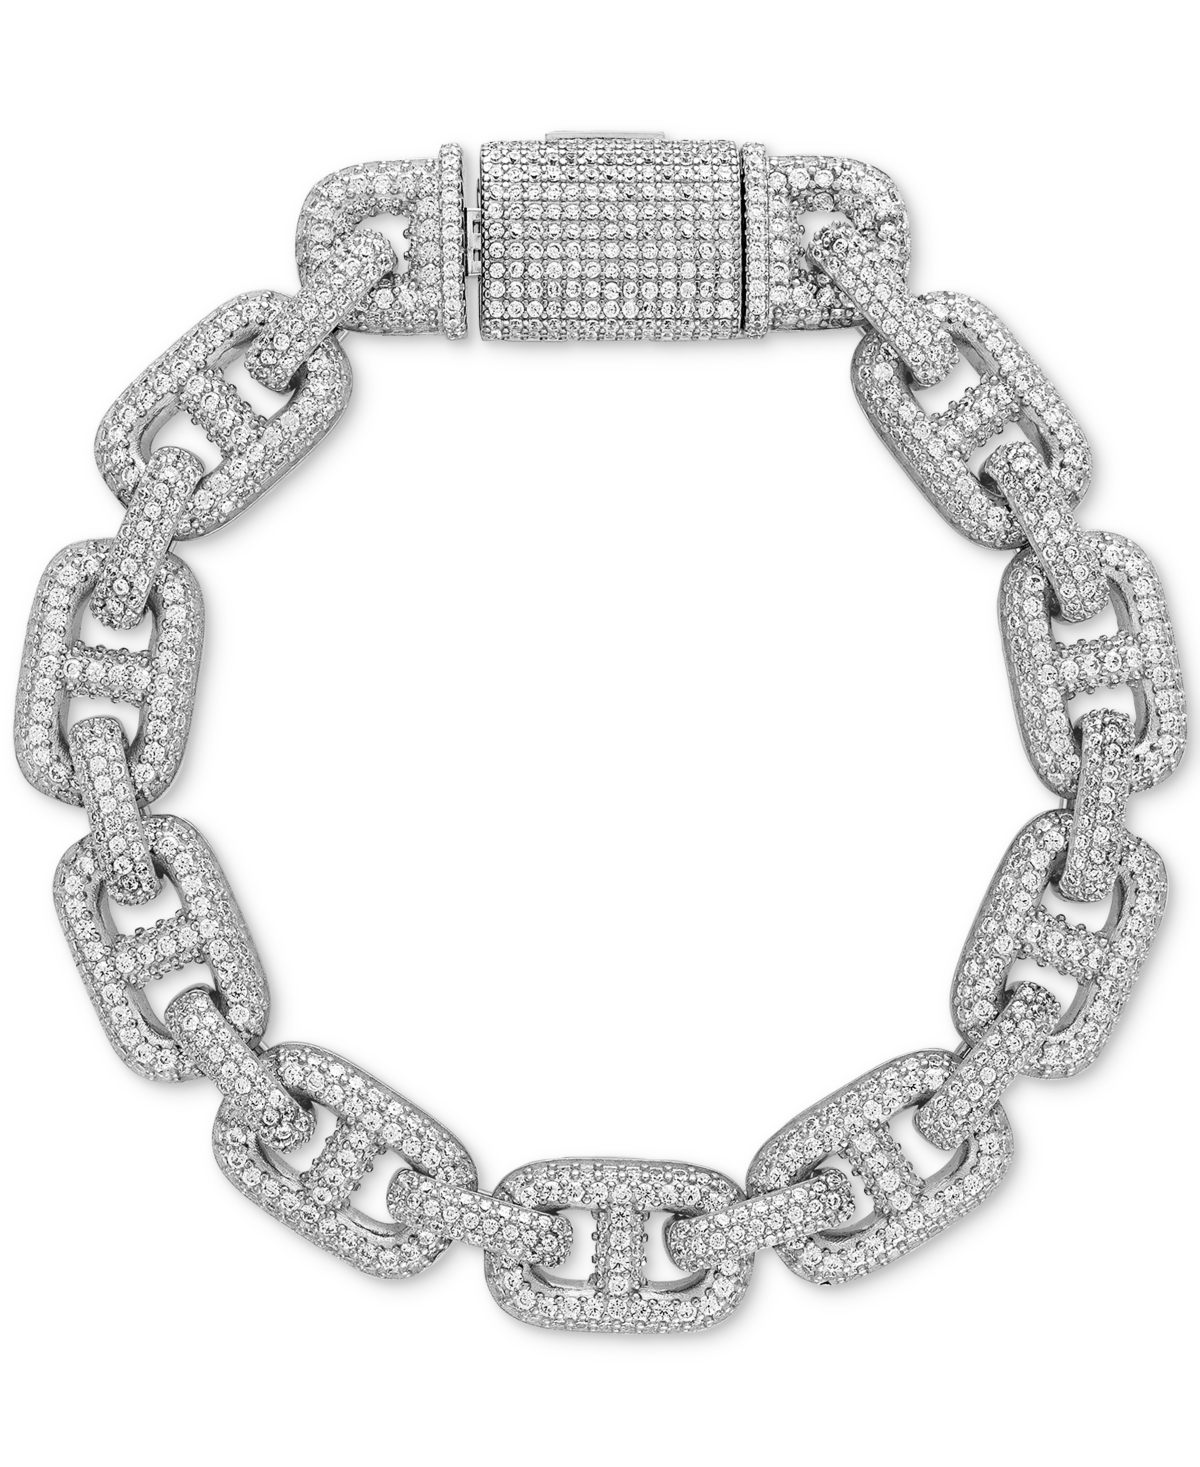 Esquire Men's Jewelry Cubic Zirconia Pave Puffed Mariner Link Chain Bracelet In Sterling Silver, Created For Macy's In White